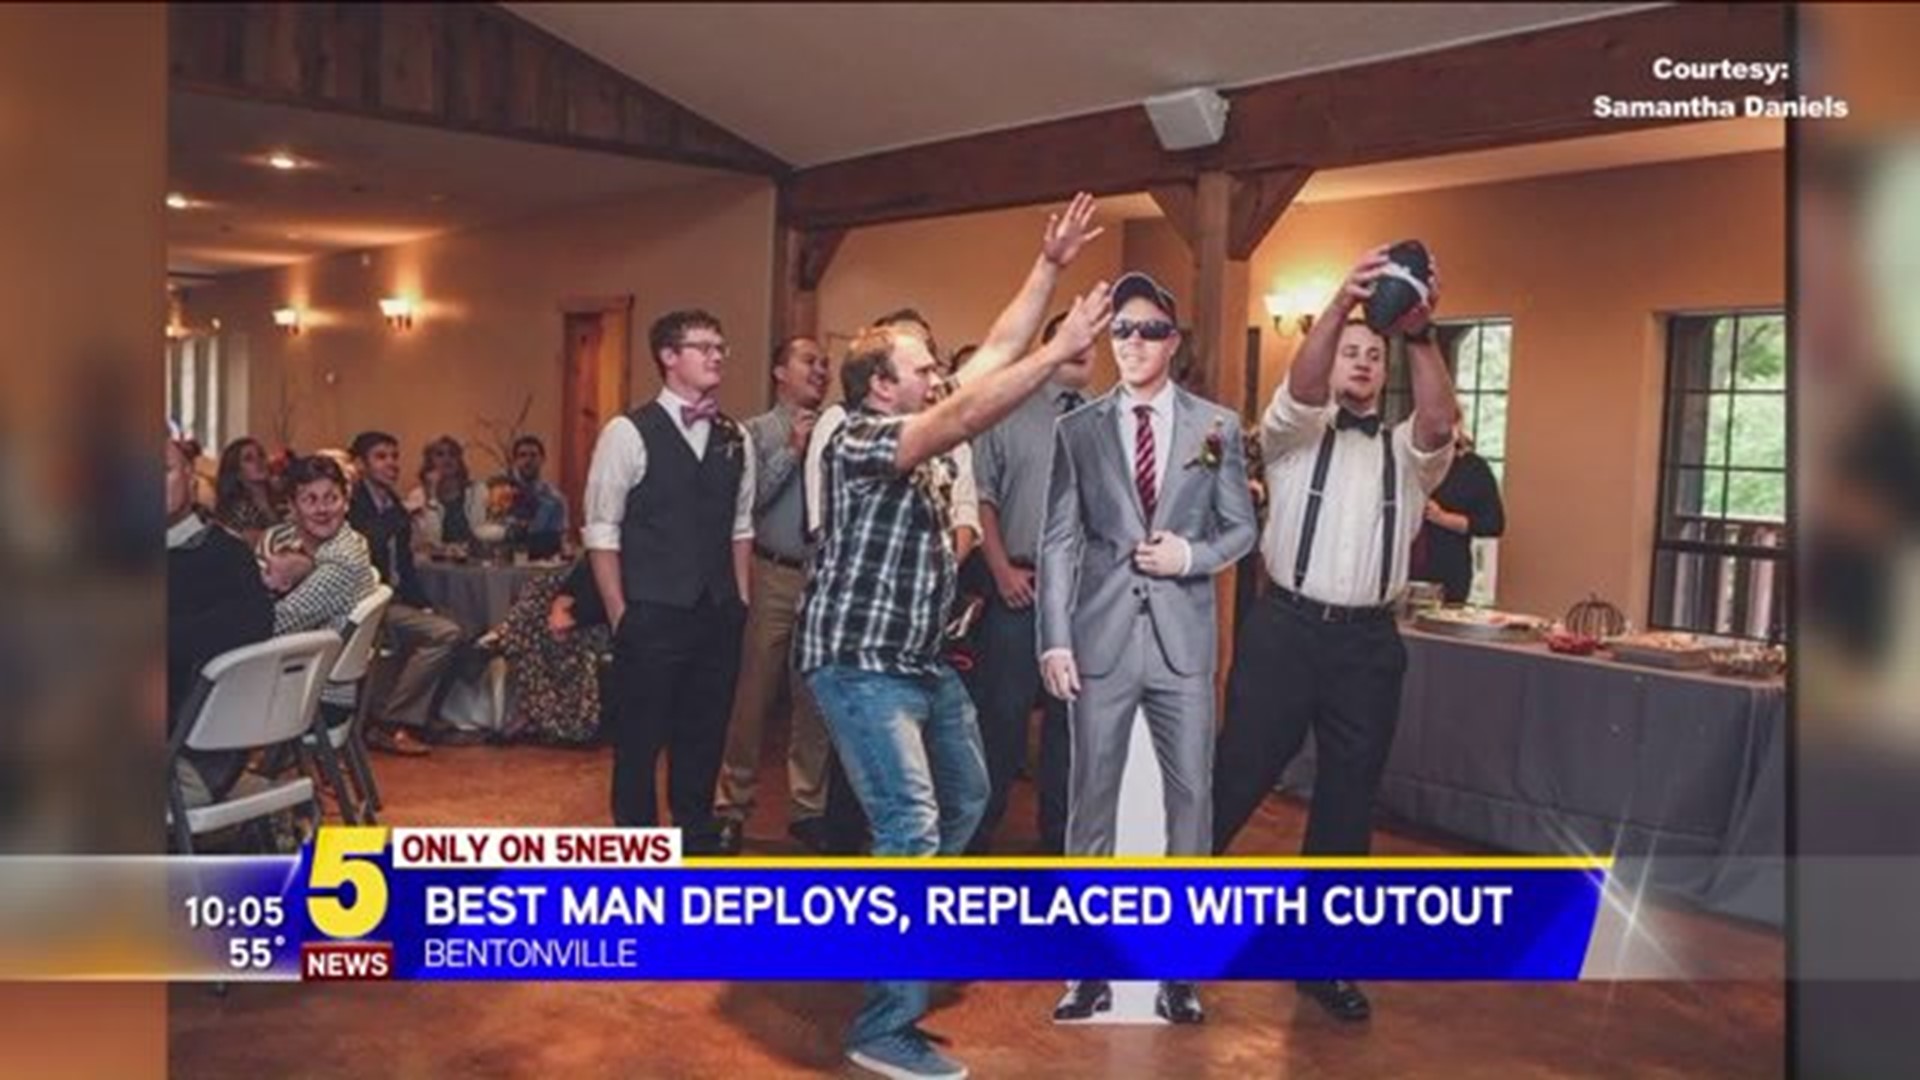 Best Man Deploys, Replaced With Cutout